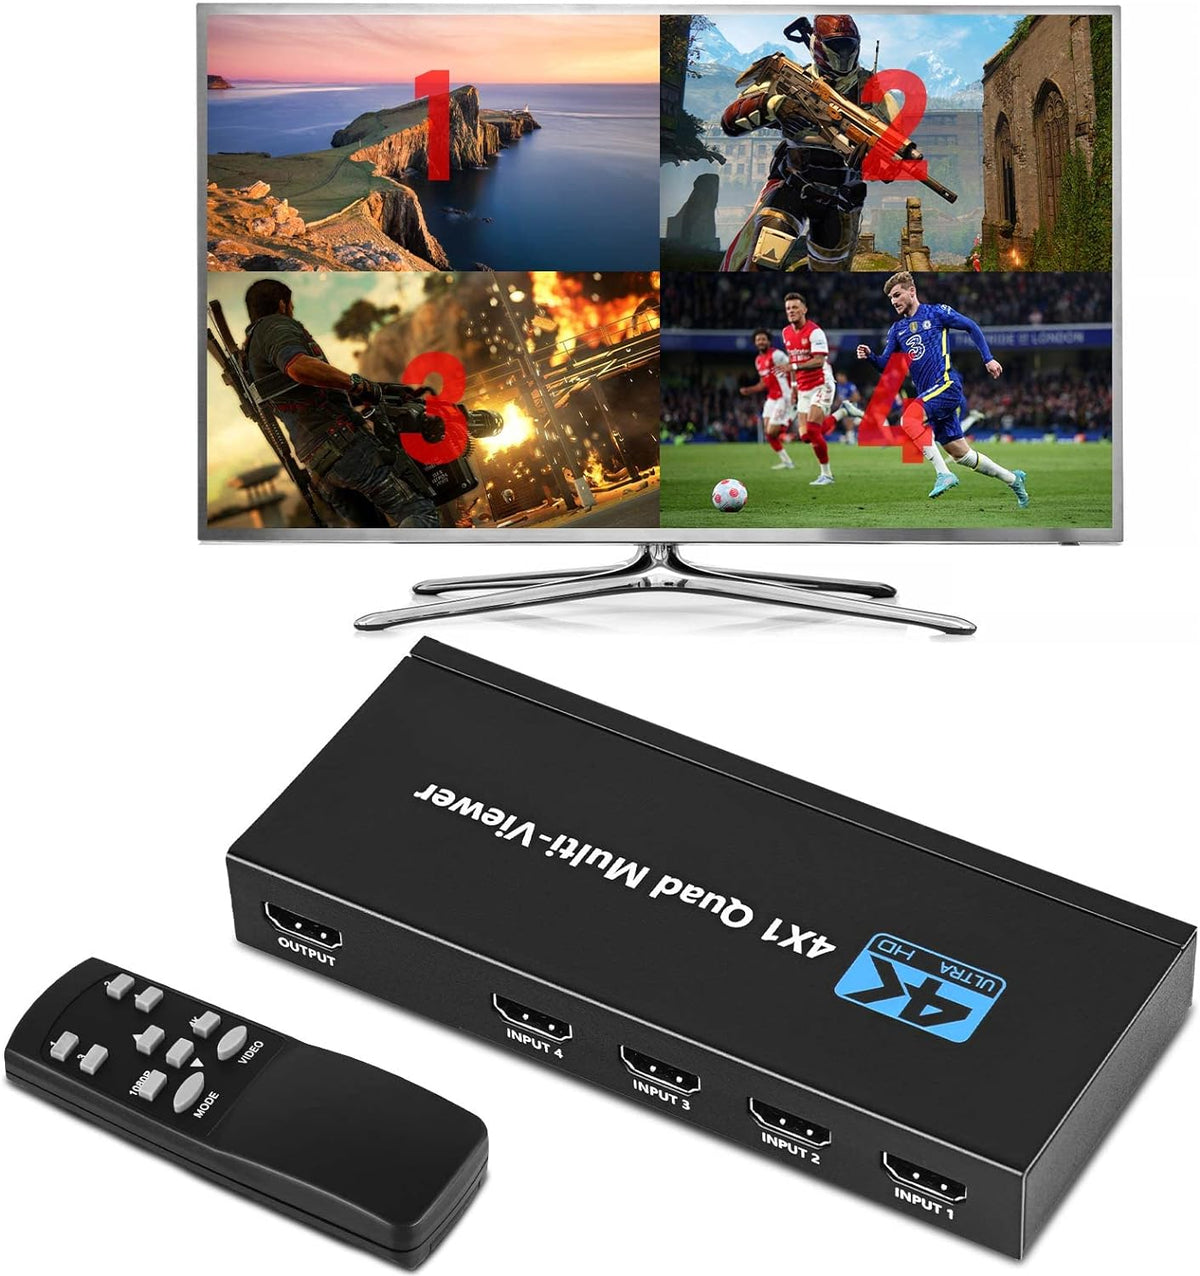 HDMI Multiviewer Switch 4x1,Tendak HDMI Quad Multi-Viewer with Seamless Switch, Split Screen,5 Display Modes,with IR Remote/Software/Push Button Selector for Security Camera, Gaming Consoles